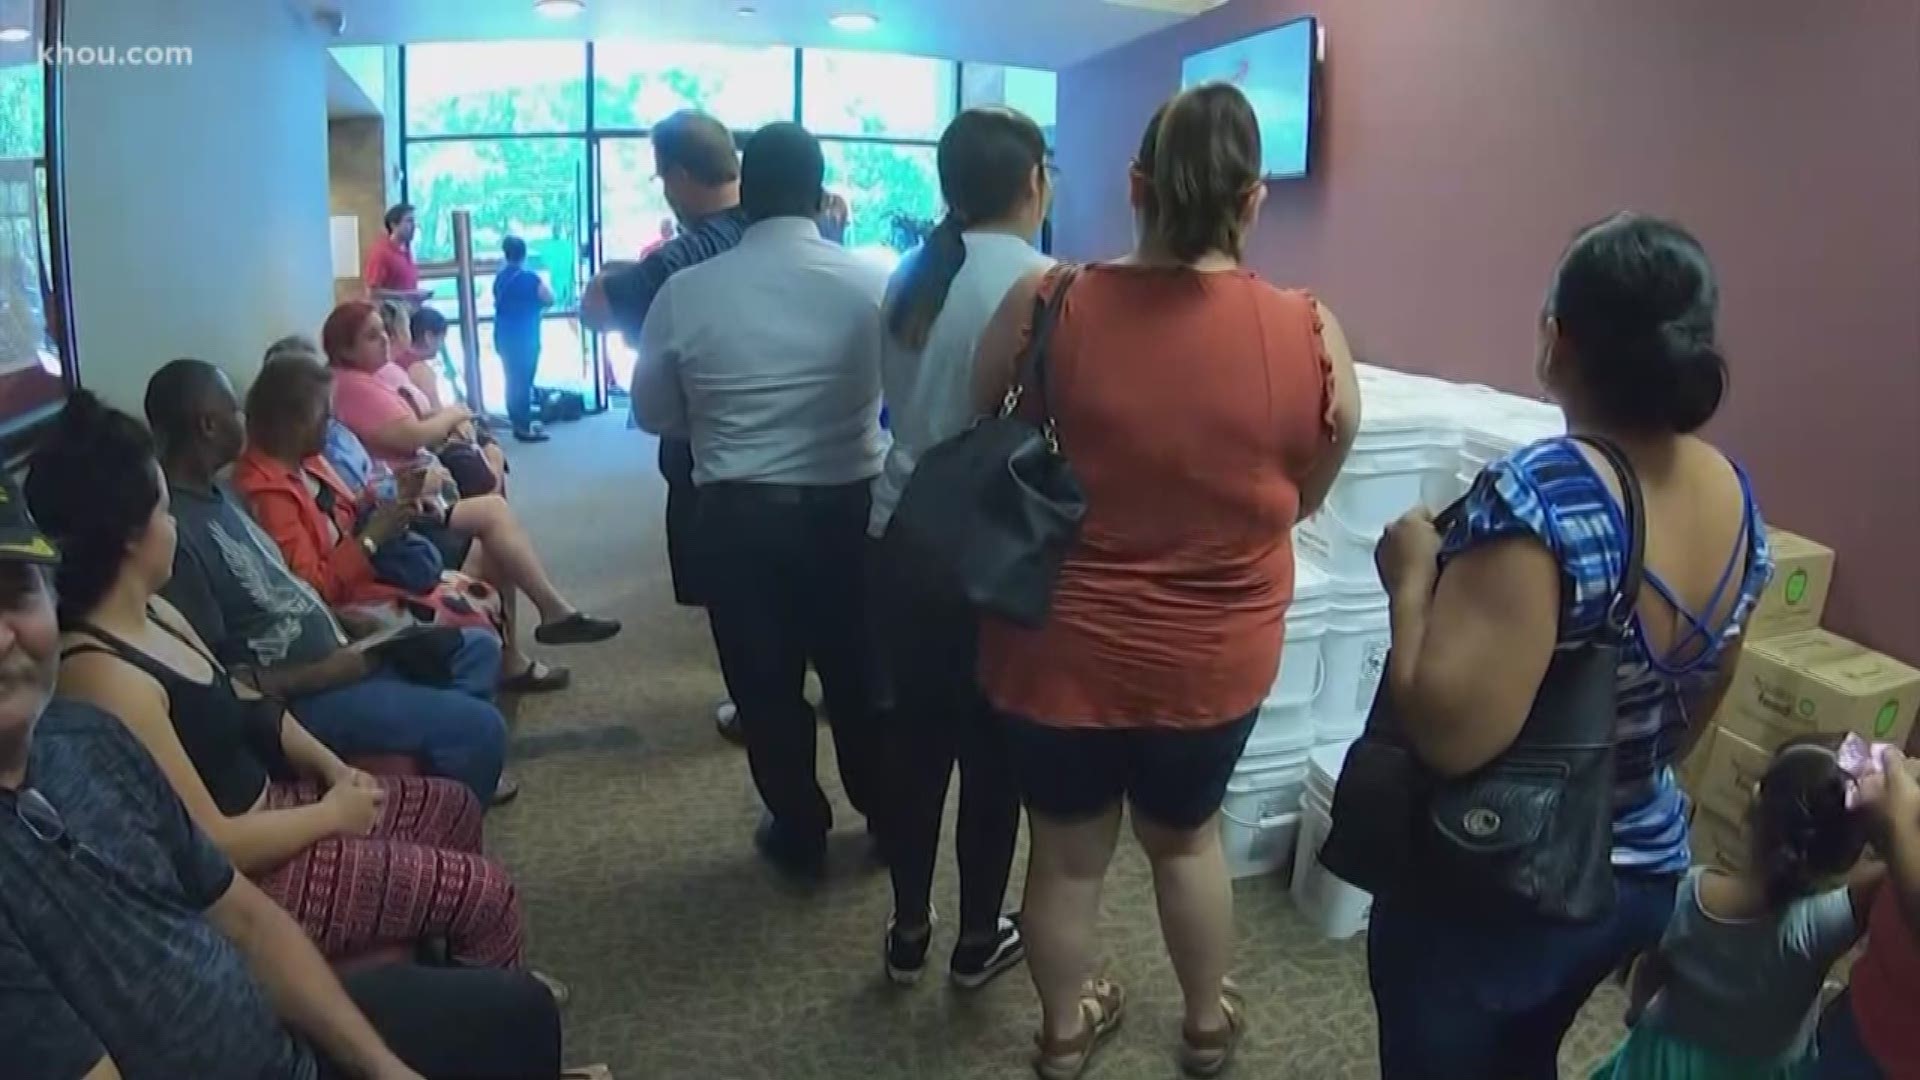 Hundreds of people whose homes were damaged by Imelda's floods are packing the recovery centers in Harris County to pick up food, water and cleaning supplies.